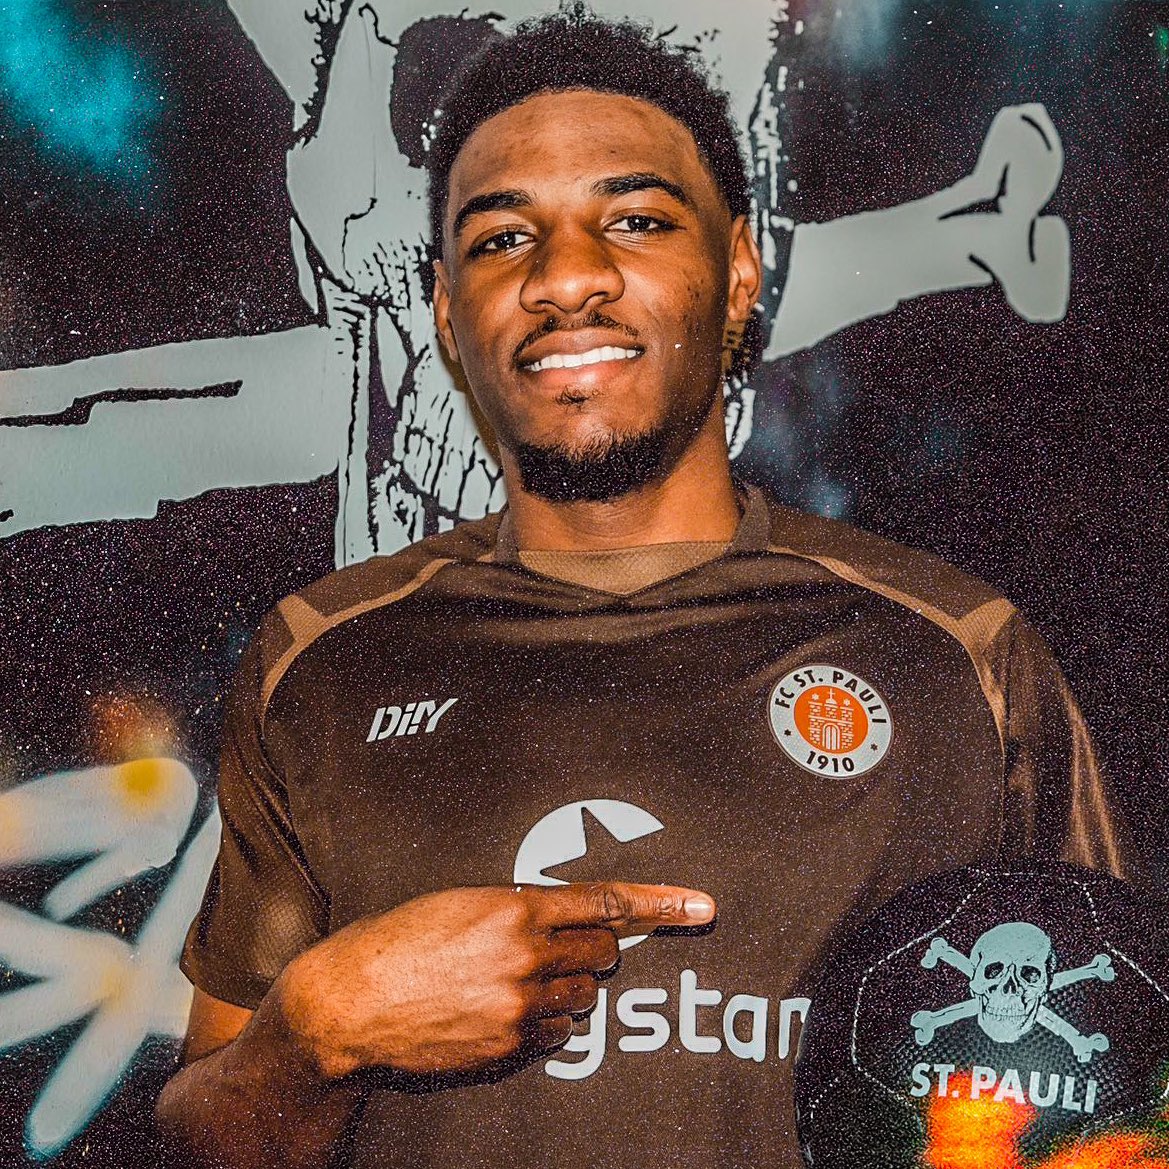 🏴󠁧󠁢󠁥󠁮󠁧󠁿🇳🇬 Dapo Afolayan (26) really went from playing in the English non-league to Bundesliga... He's just been promoted to the top tier of German football with St. Pauli! Superb journey, @dapo_afolayan. Never give up on your dreams. 📈❤️